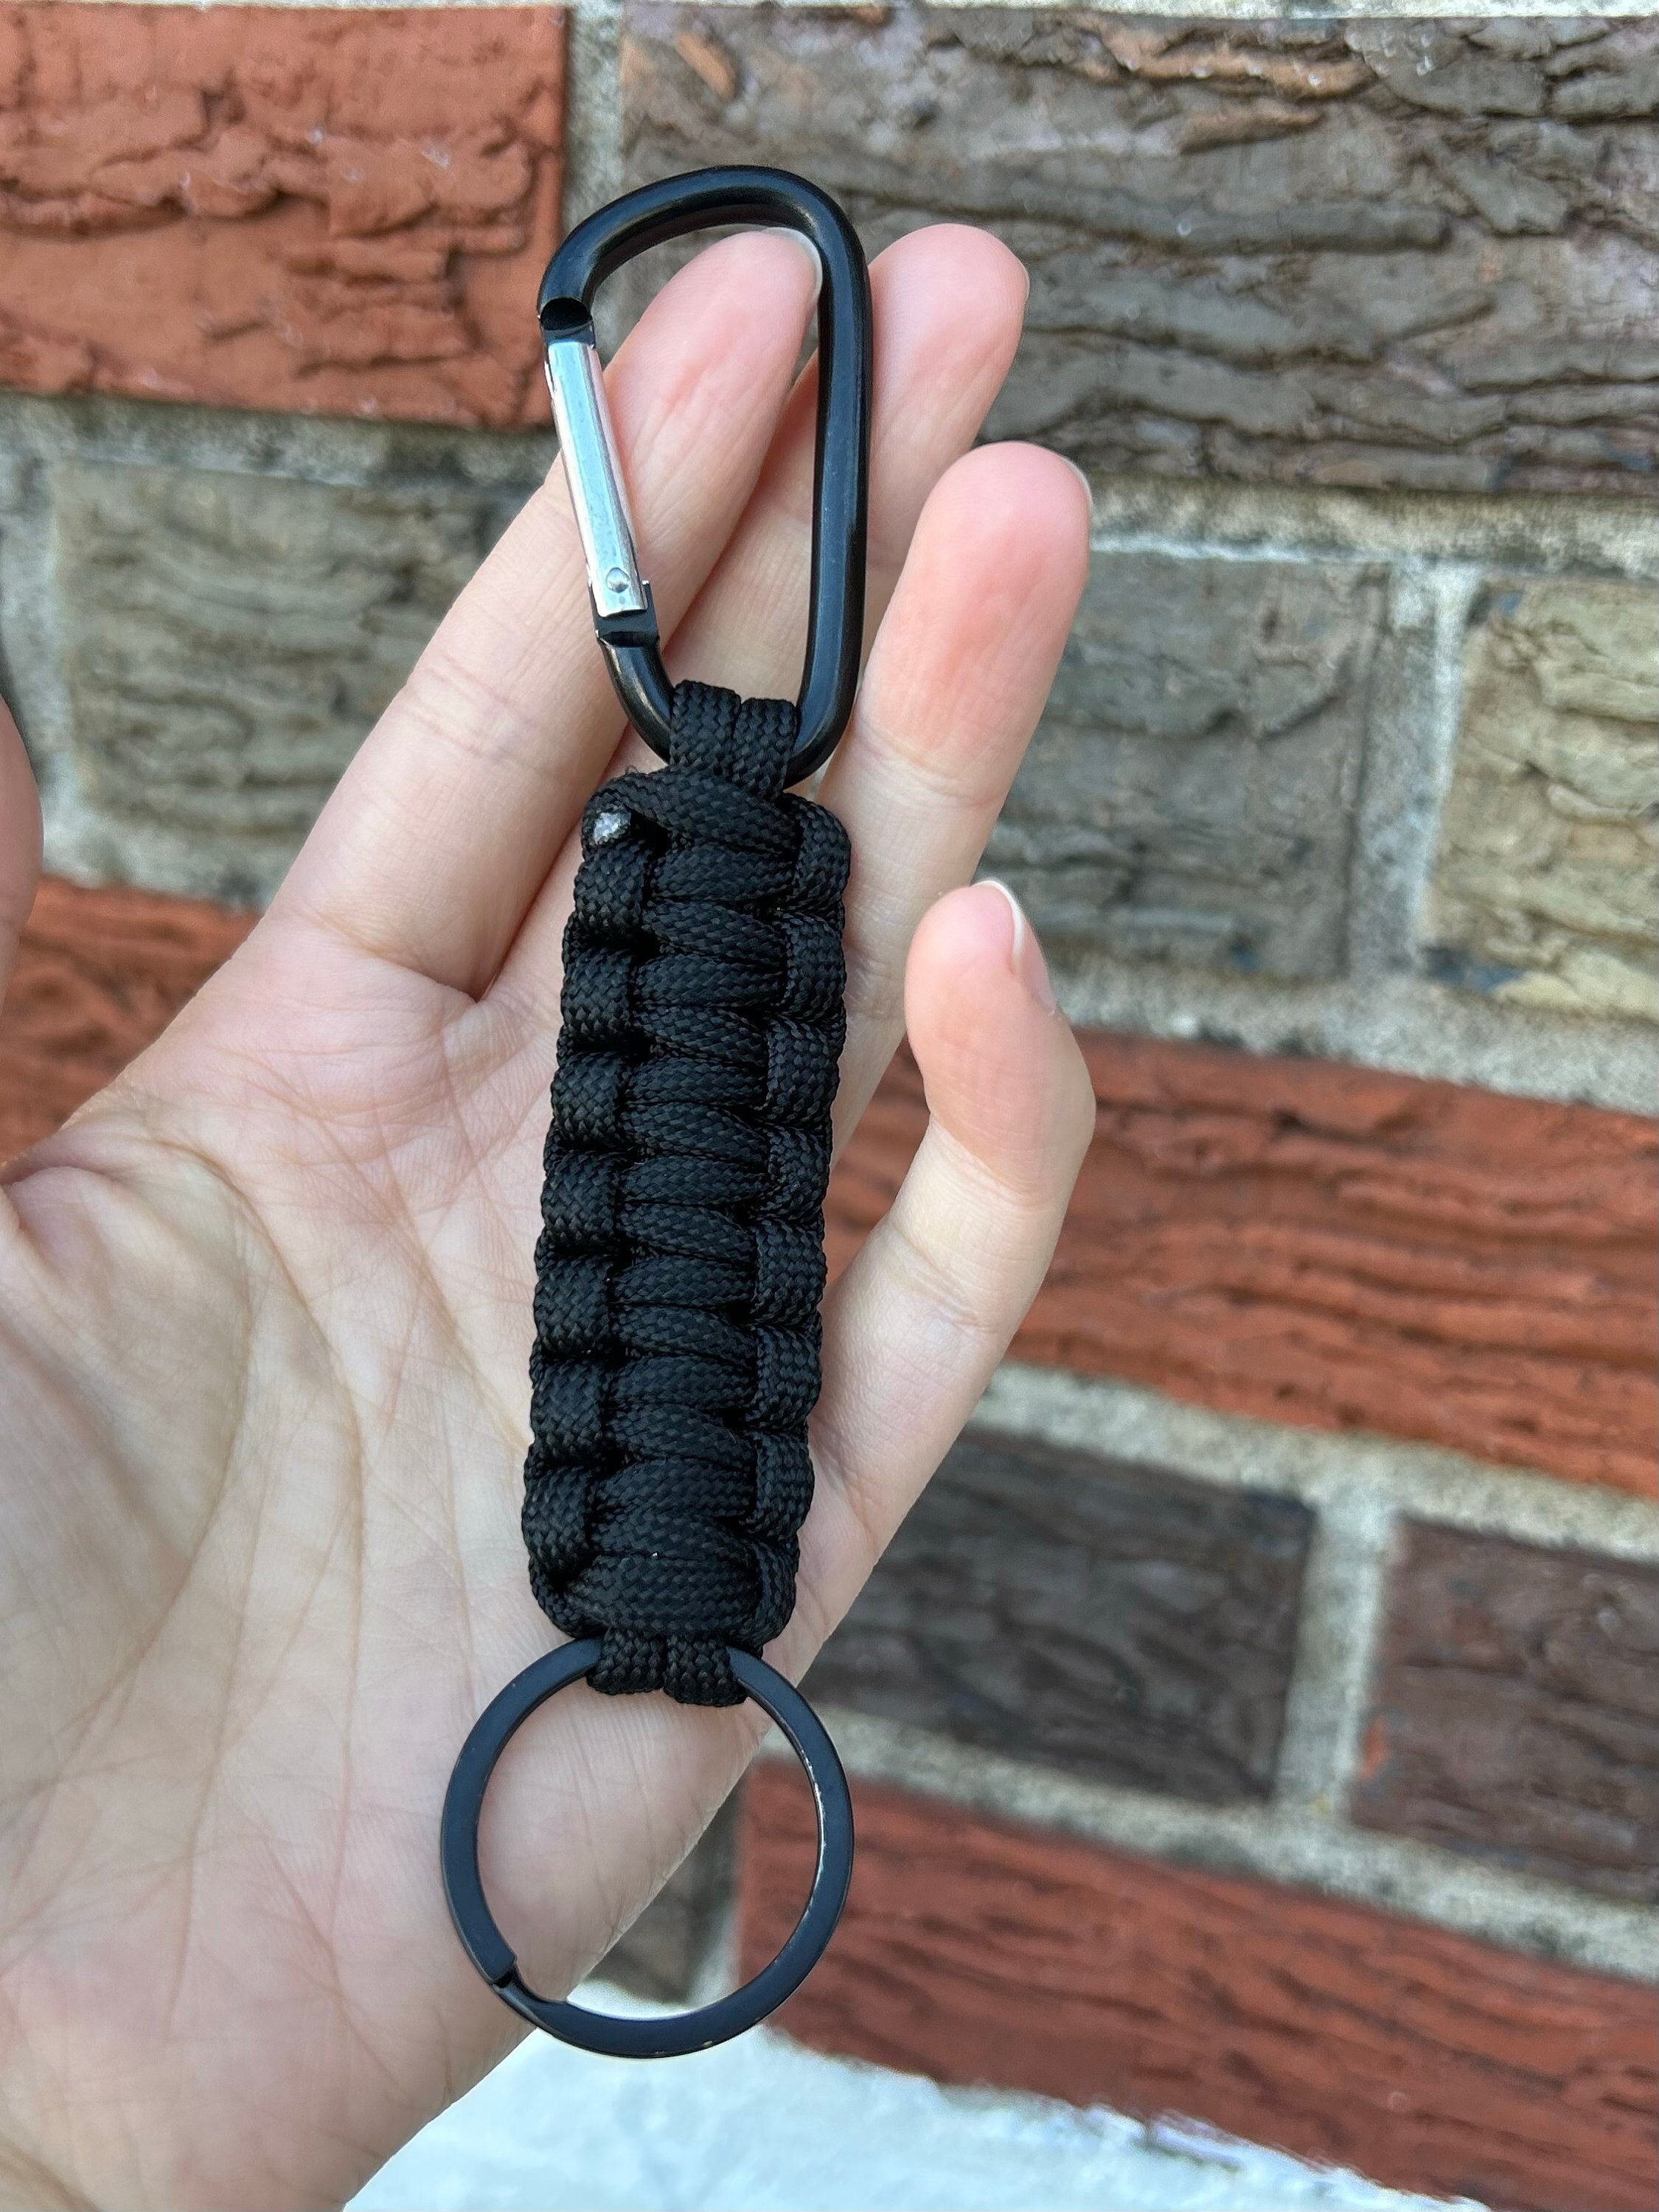 Father's Day Paracord Carabiner Keychain Craft Kit - Makes 12